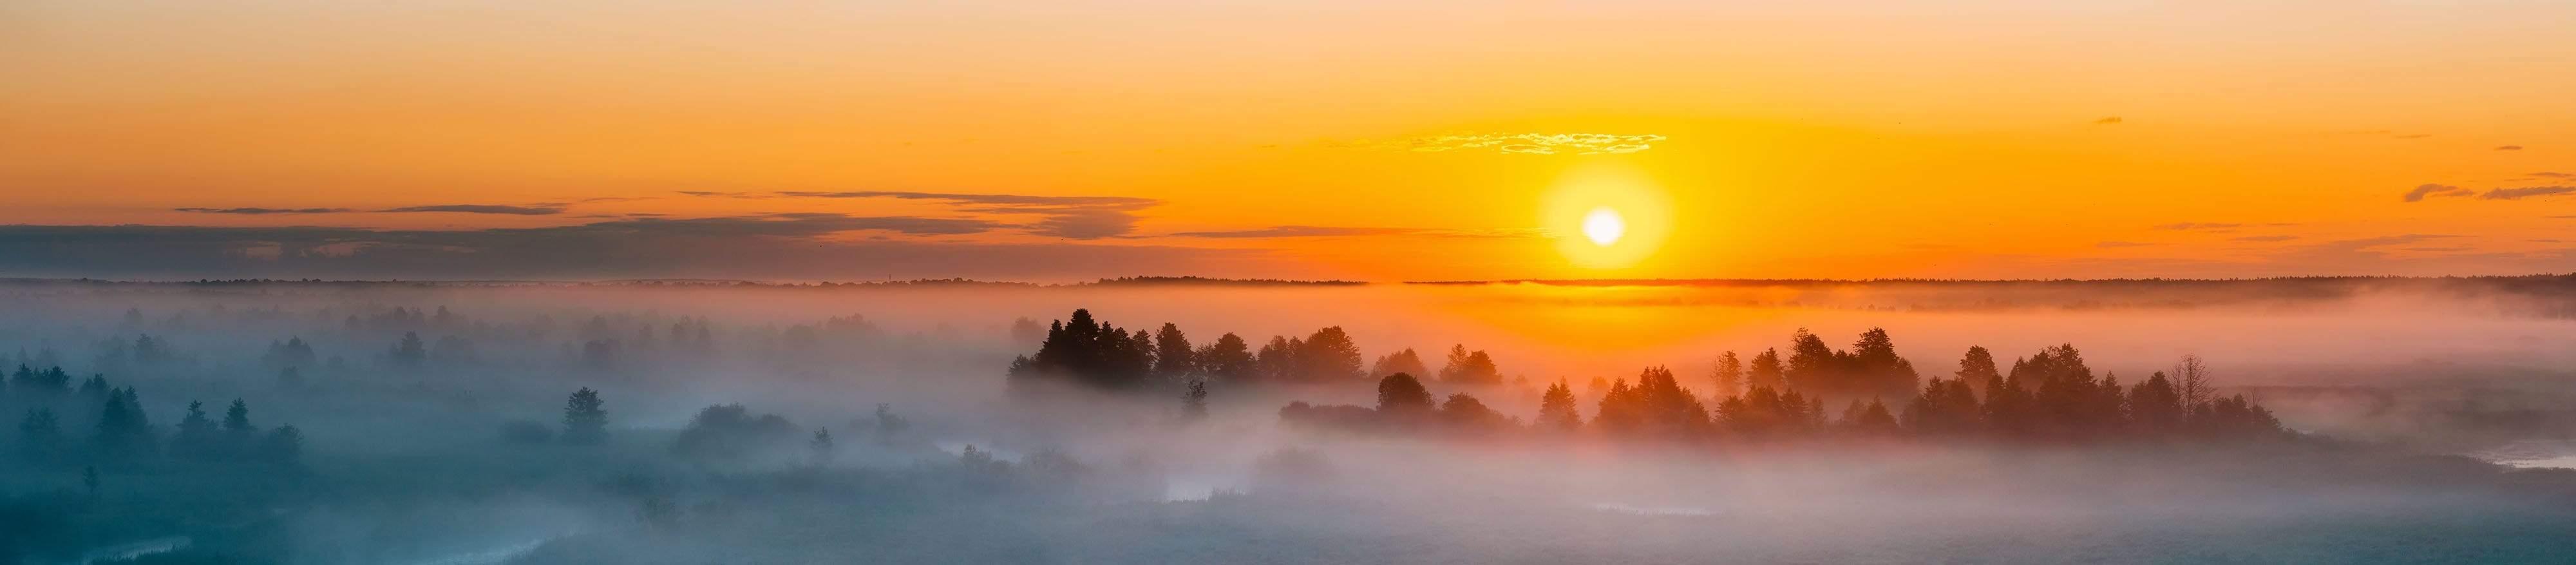 Wide Sunset over foggy forest